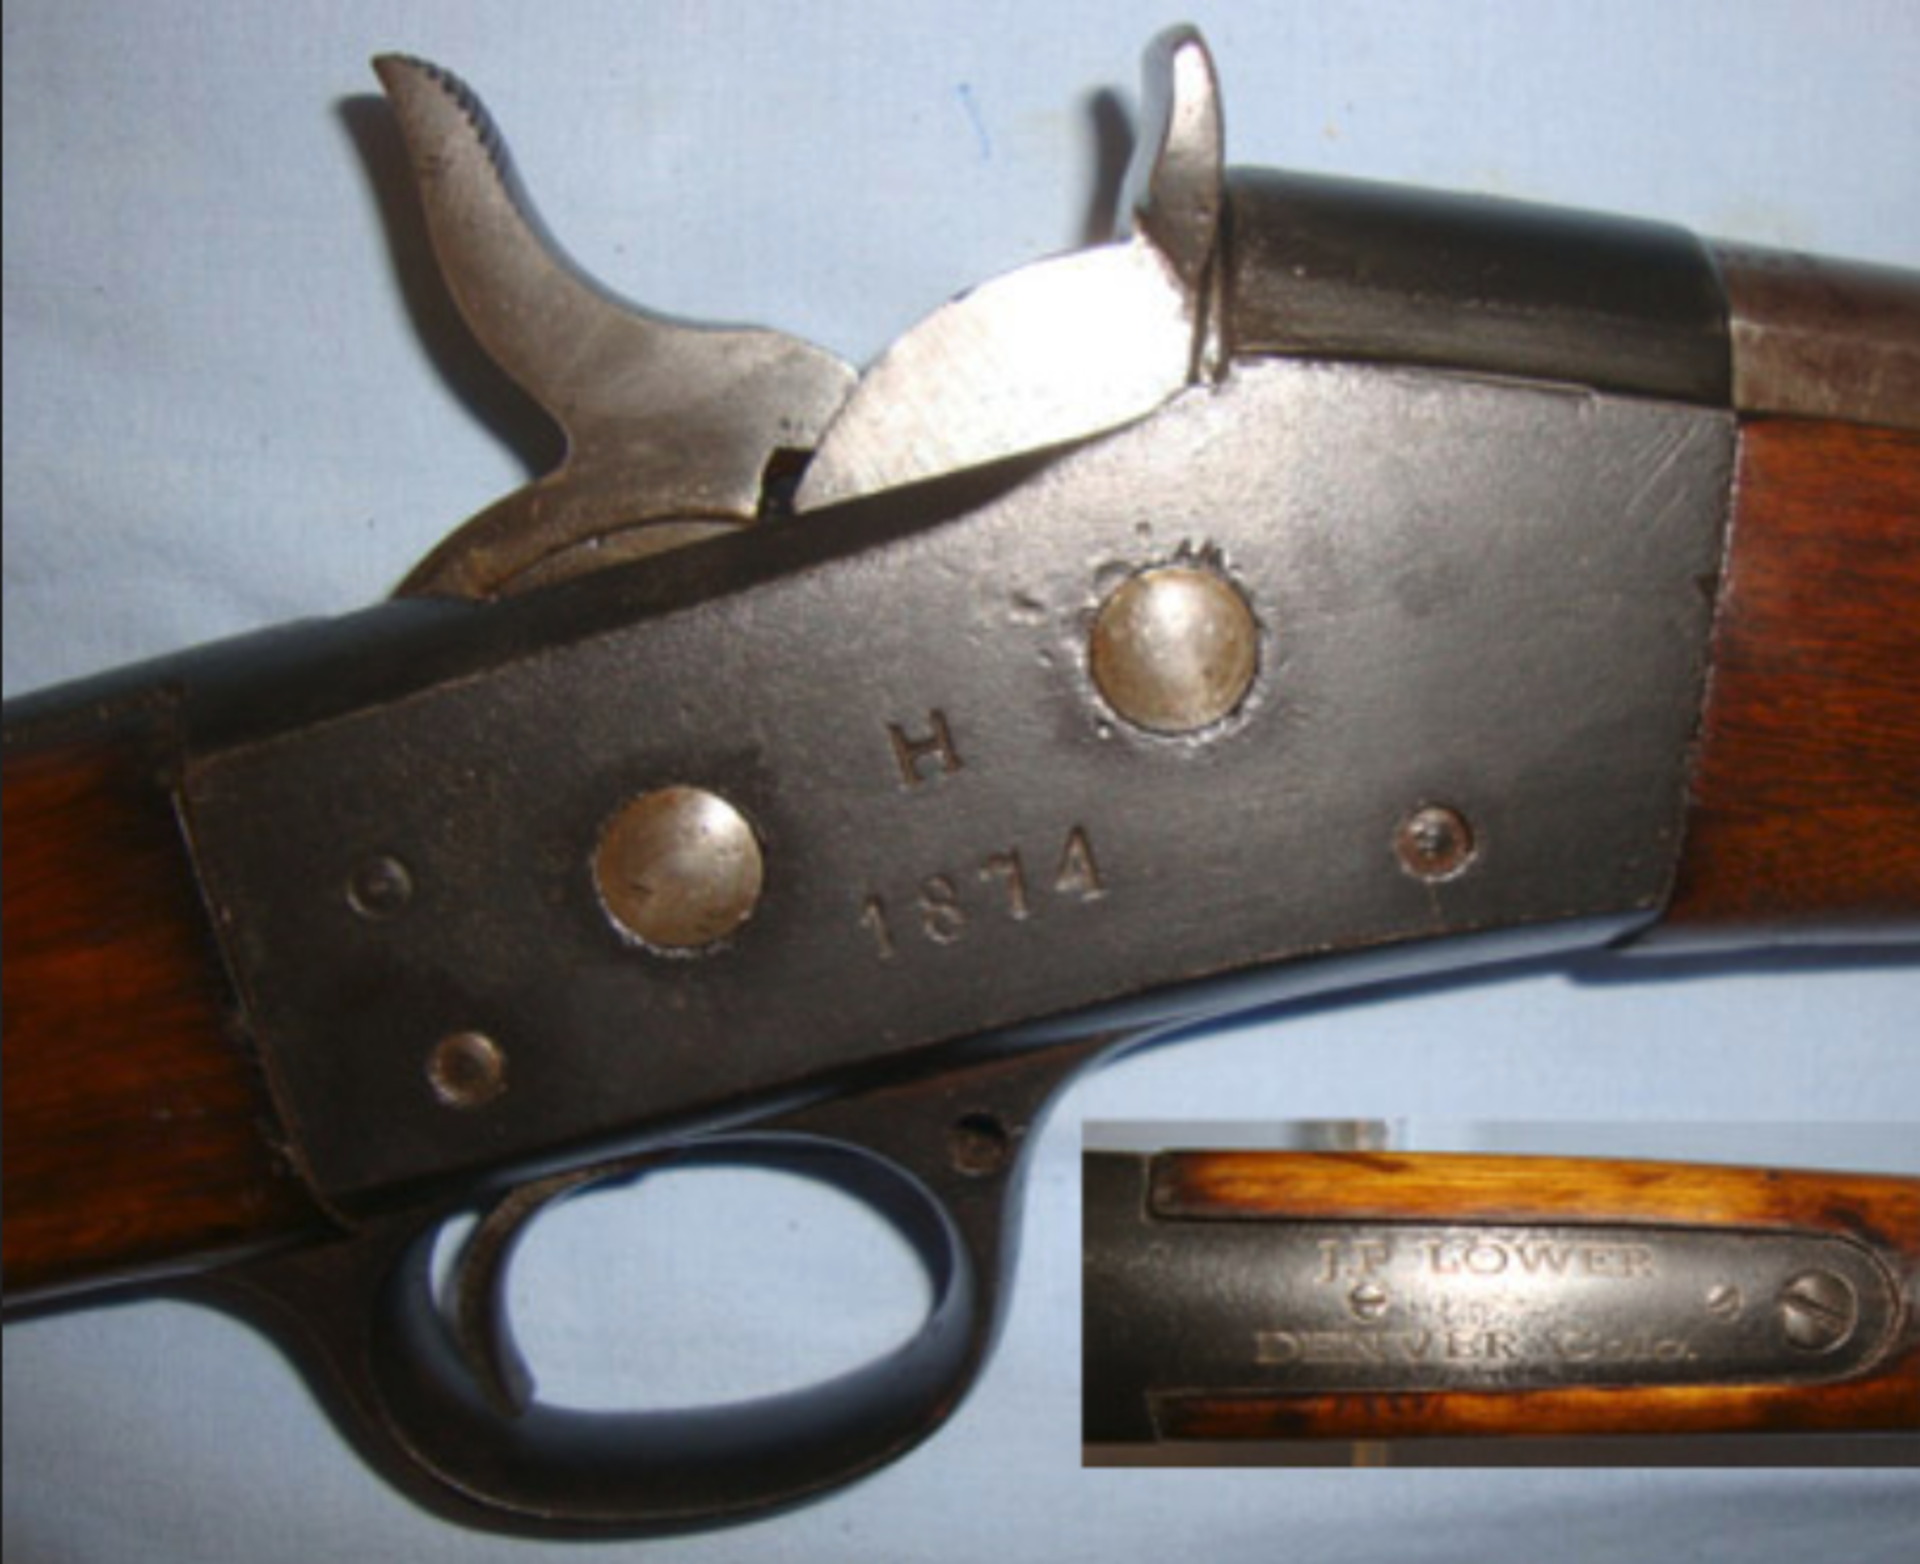 Remington 1874 Dated Swedish Rolling Block 11mm Carbine Converted To U.S. Military 50.70 Calibre - Image 3 of 3